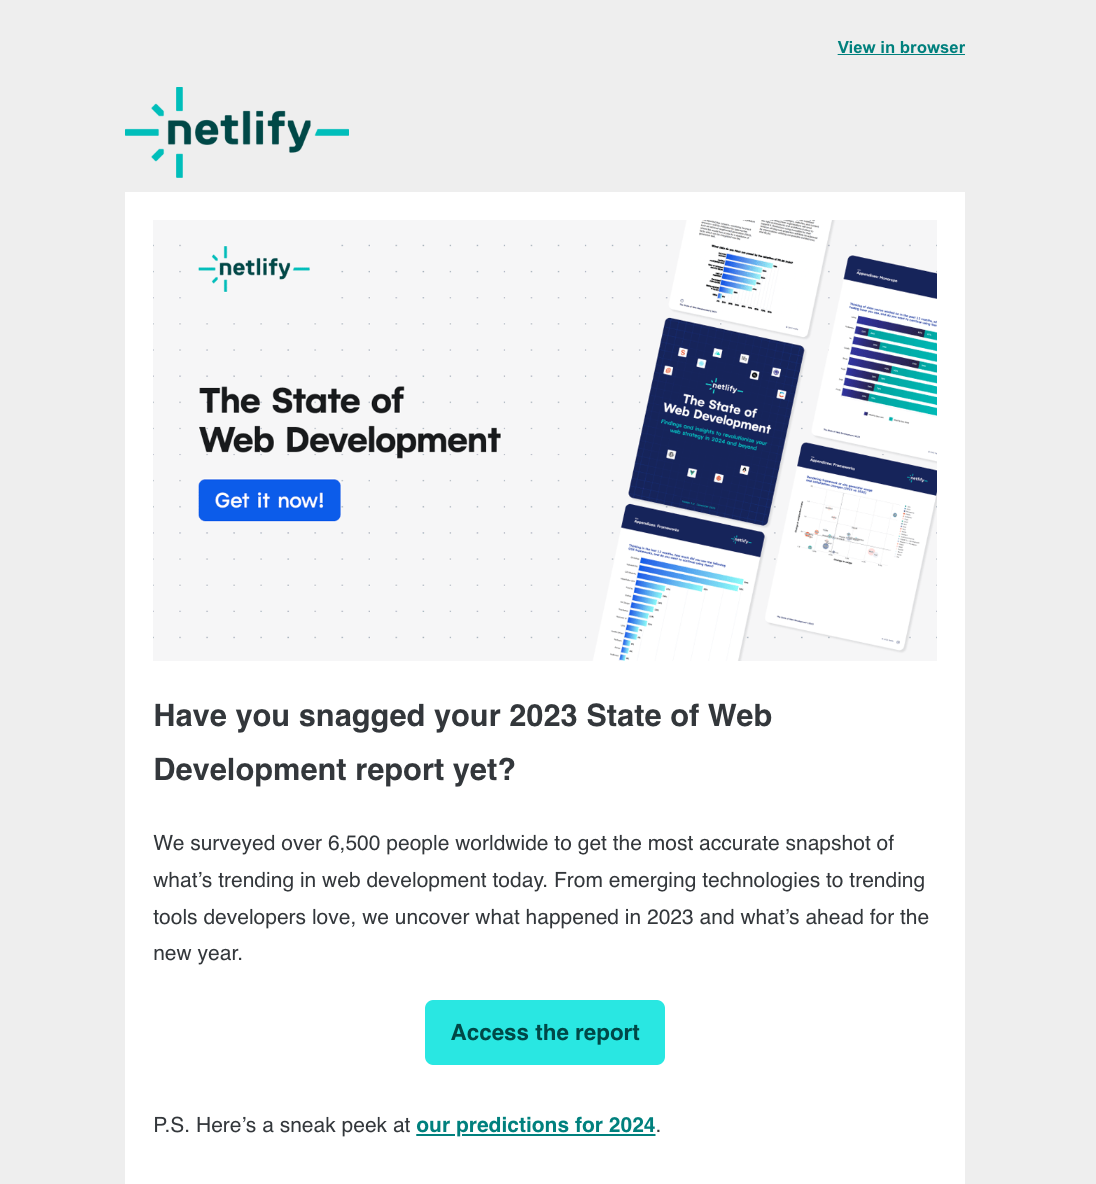 Year-in-review emails: Screenshot of Netlify's year-in-review email